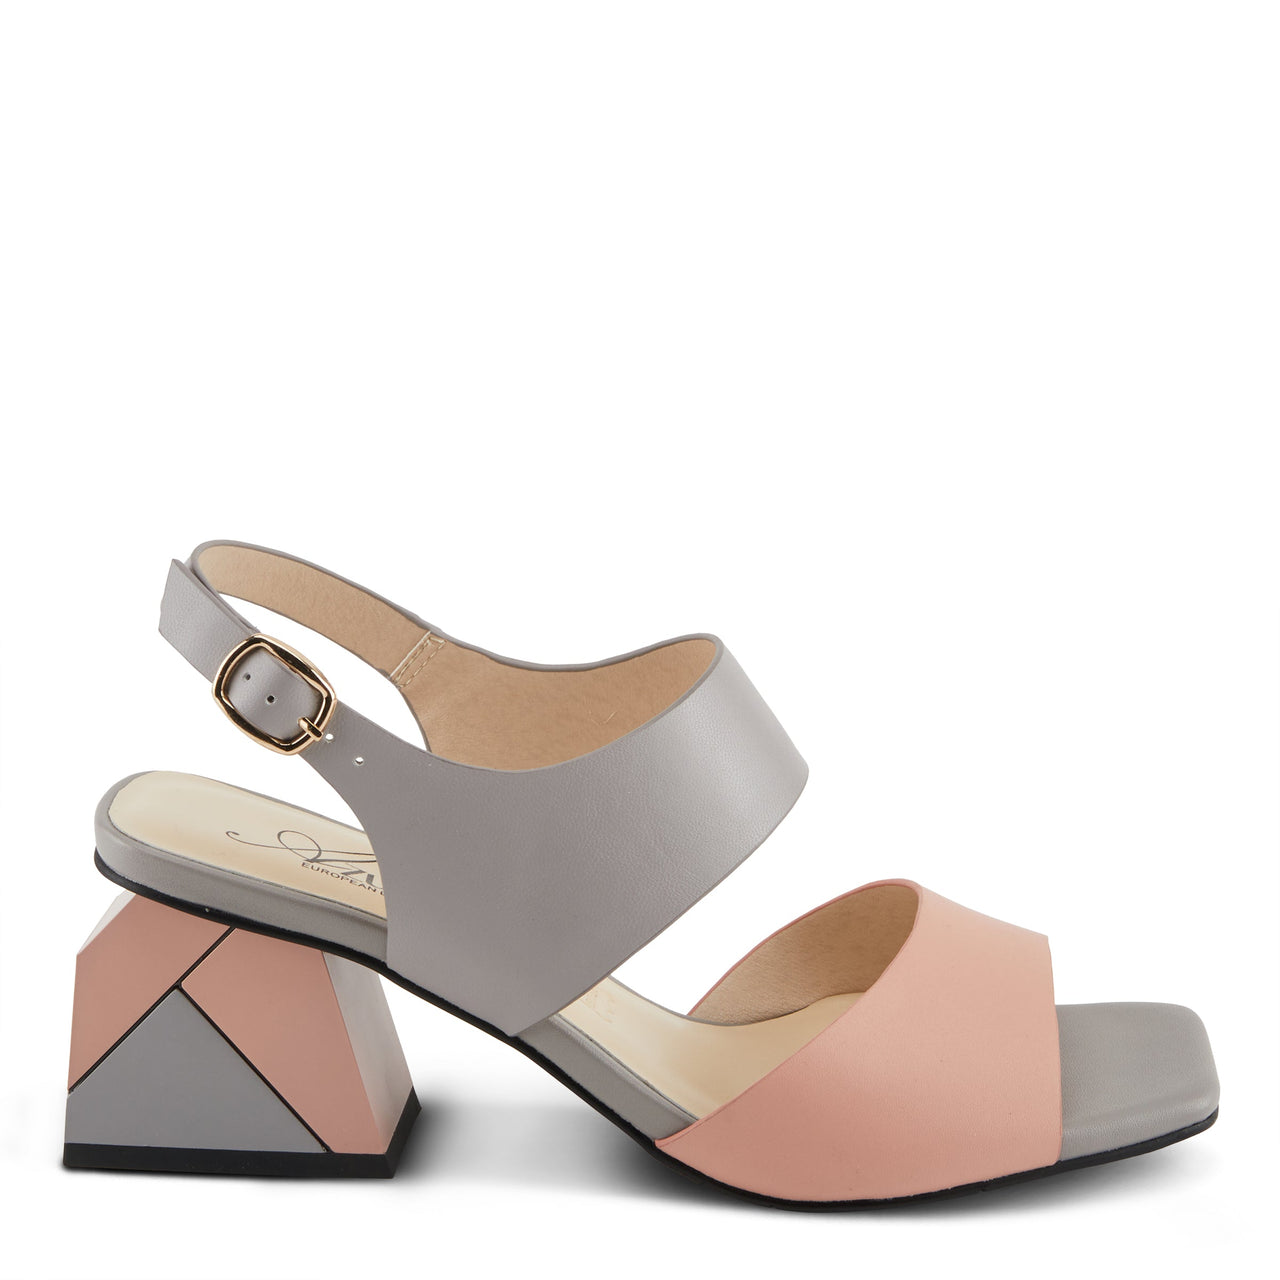 Stylish and comfortable Spring Step Shoes Azura Checkmate Sandals in a unique design perfect for summer outings and casual wear